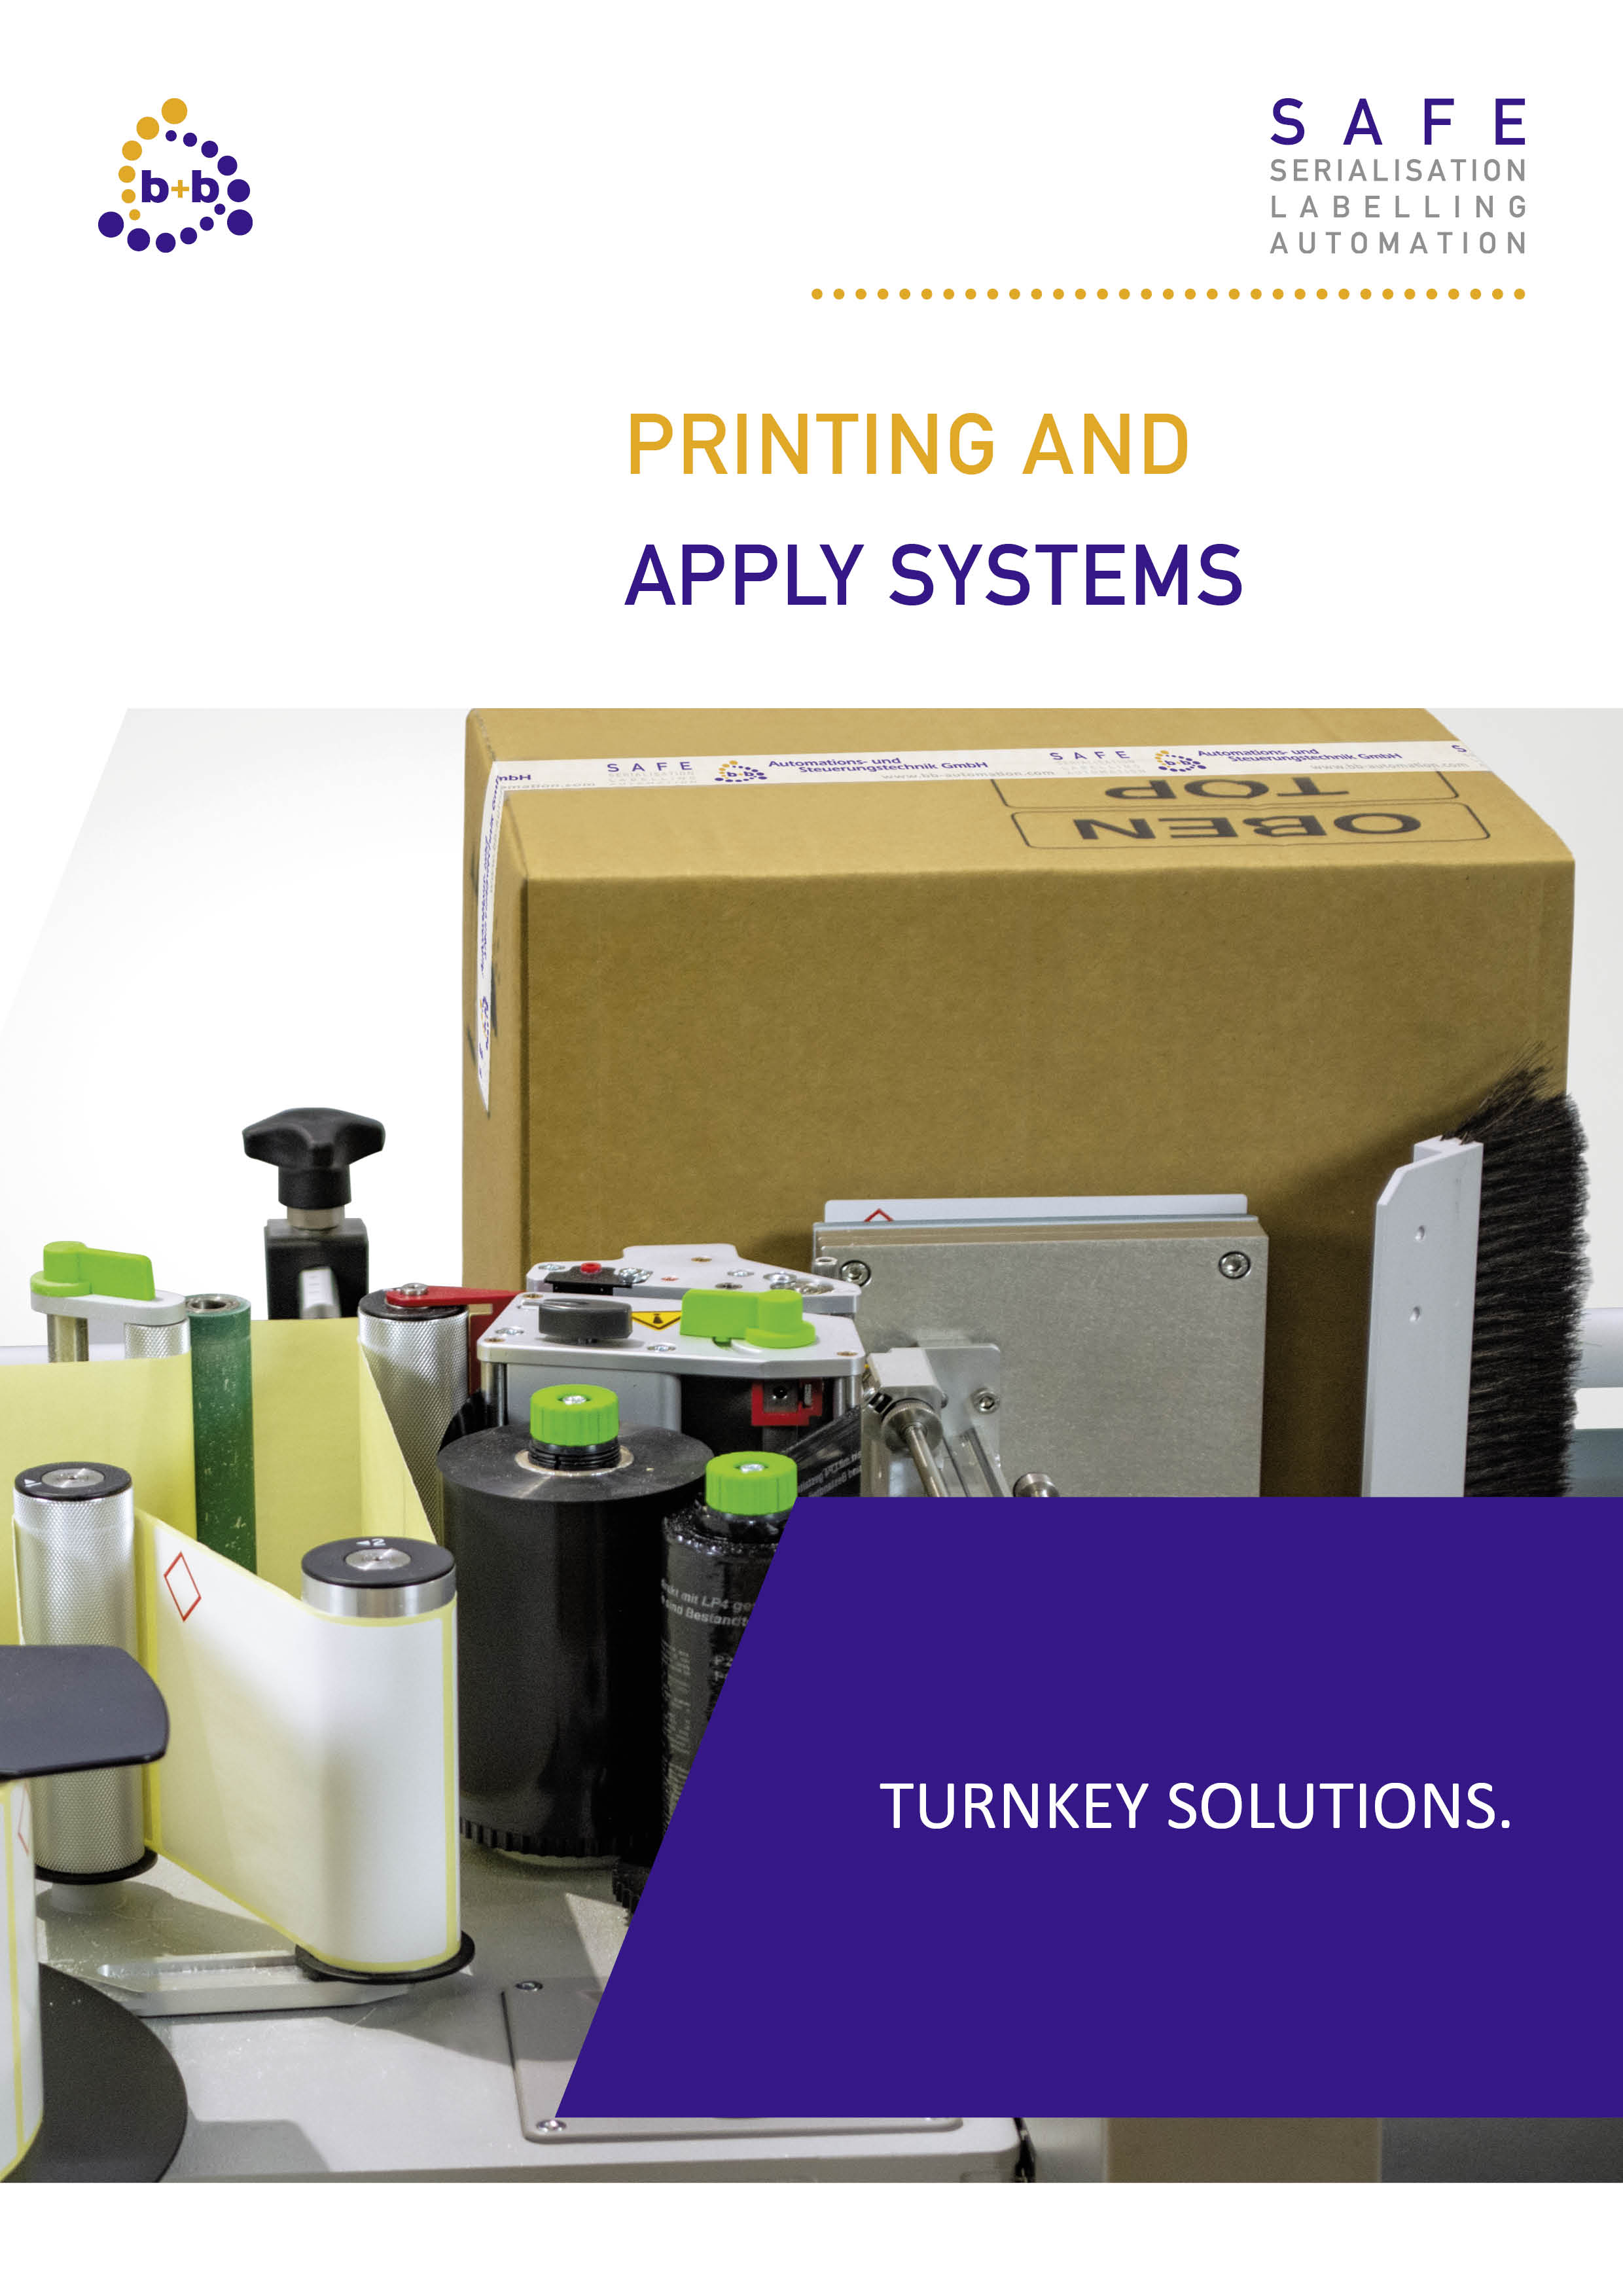 Print and apply systems